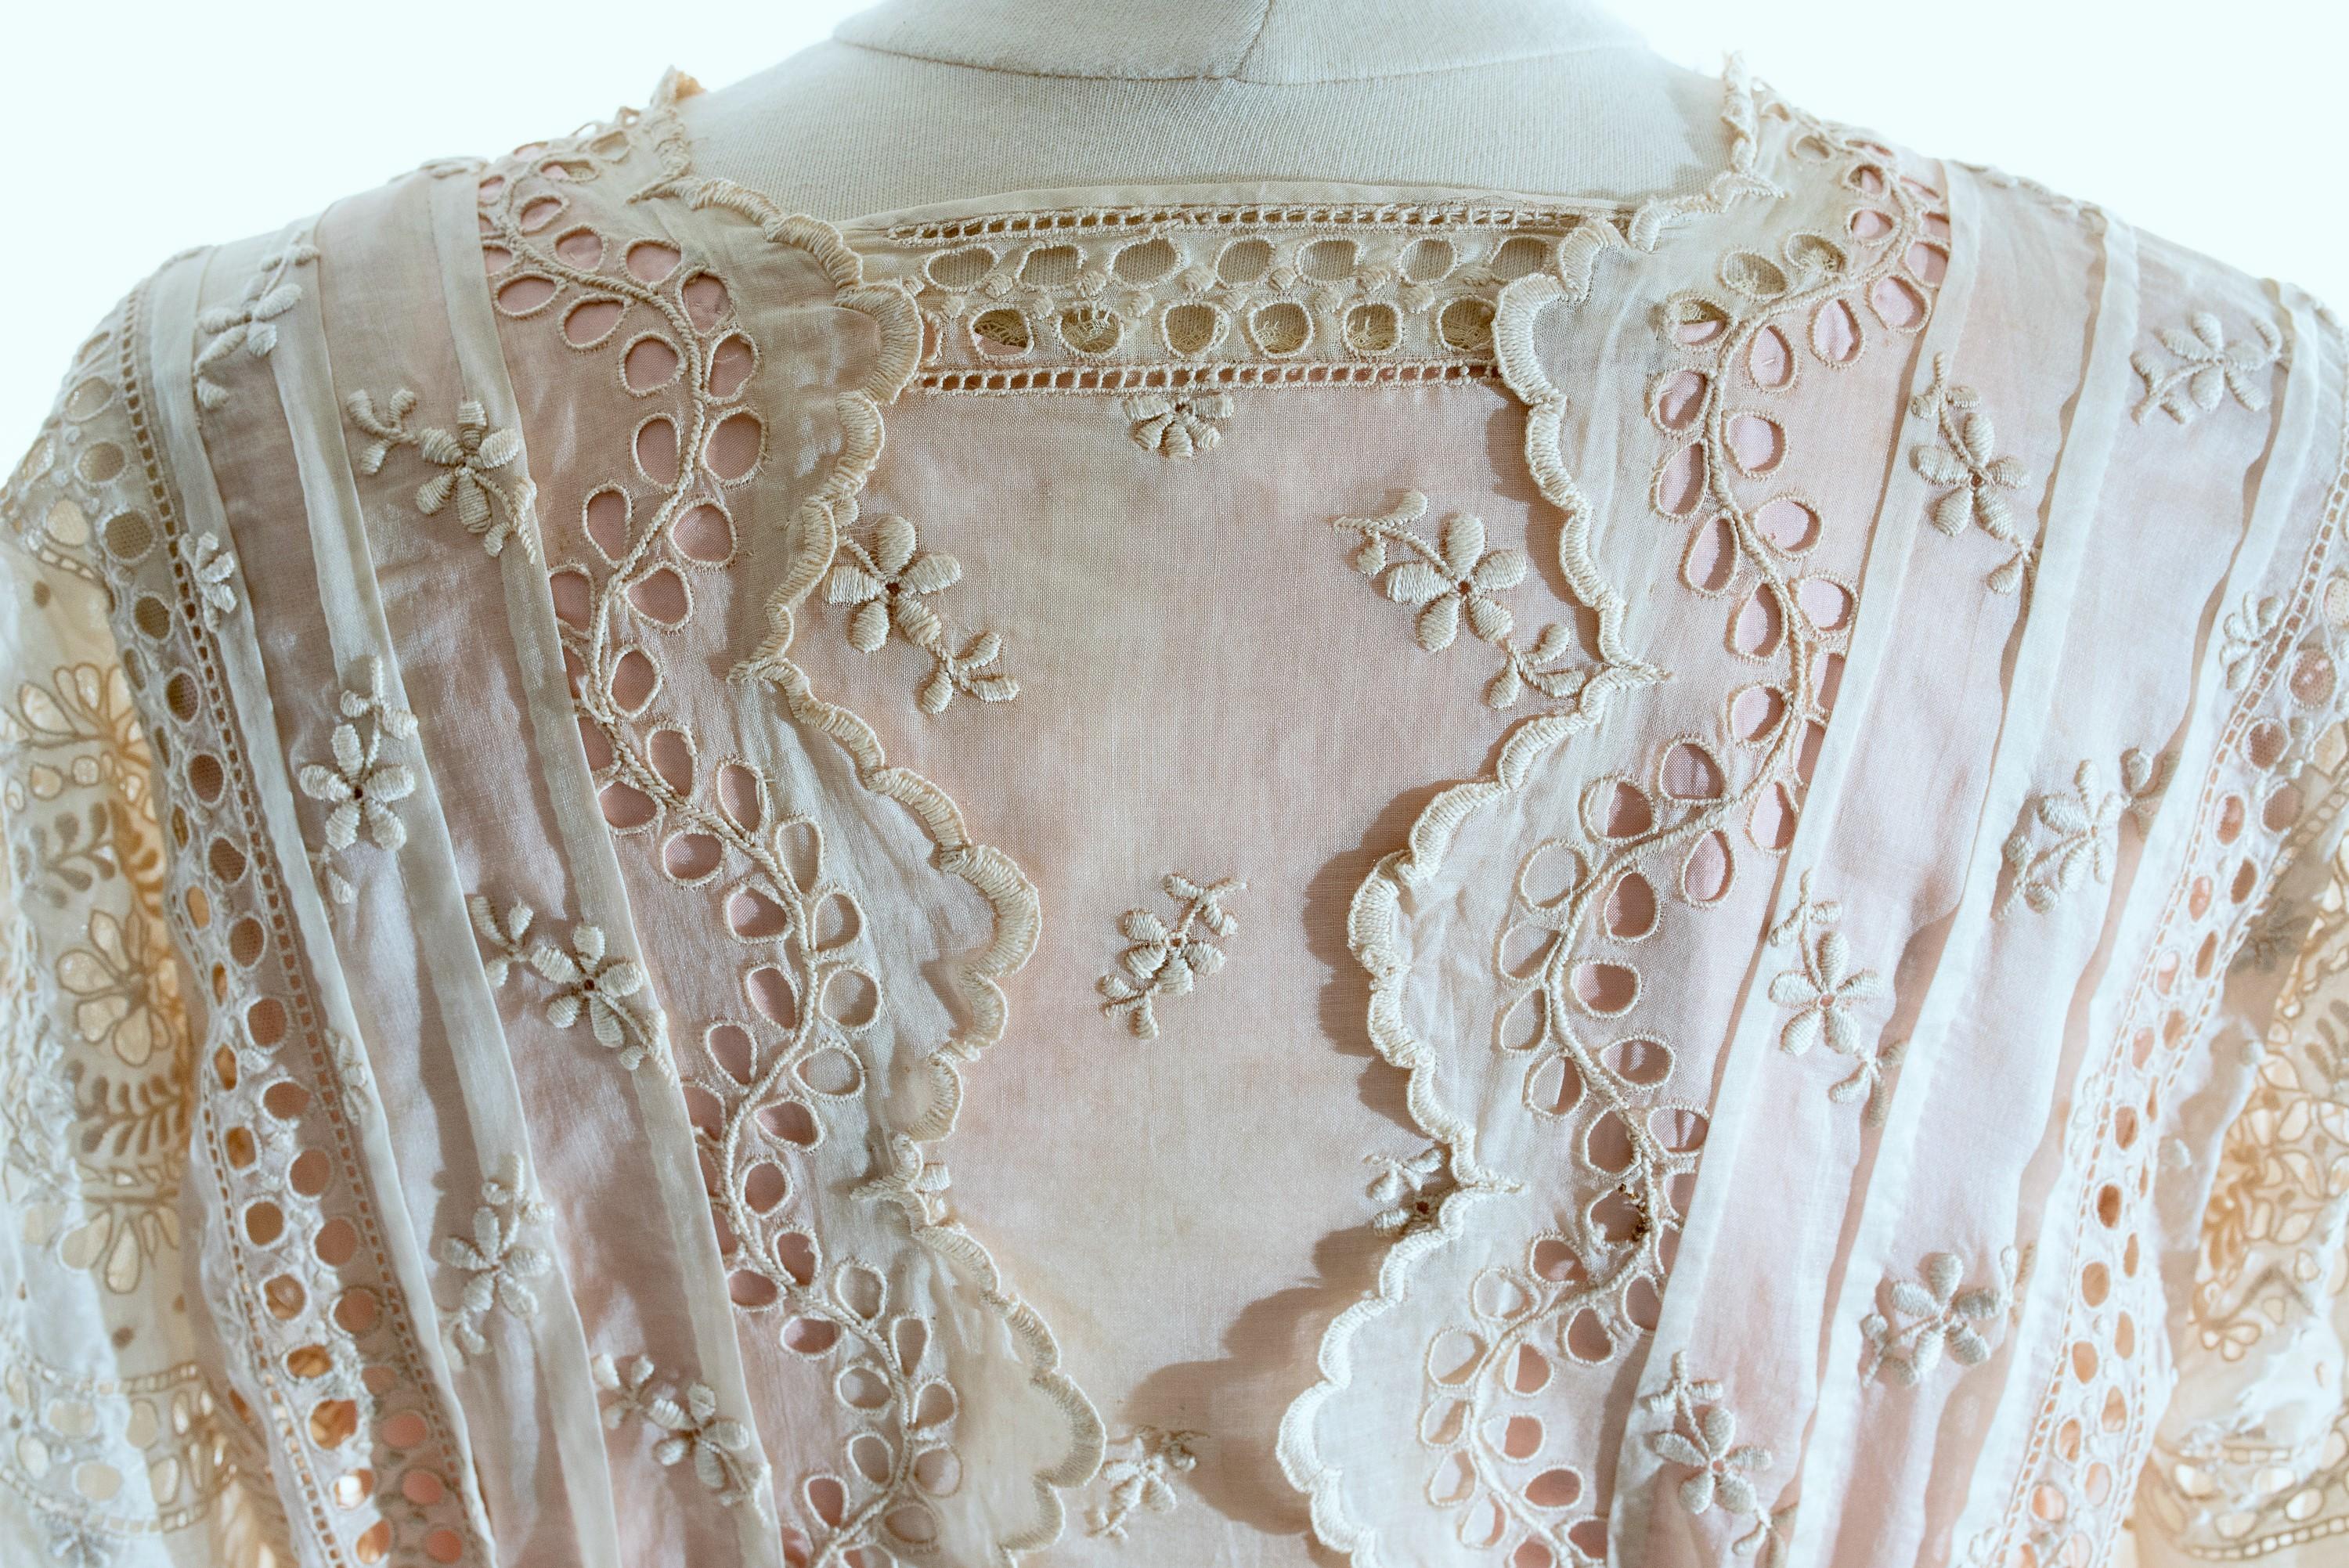 A silk pongee & White Embroidery Chiffon Summer Dress - France Circa 1920 For Sale 1